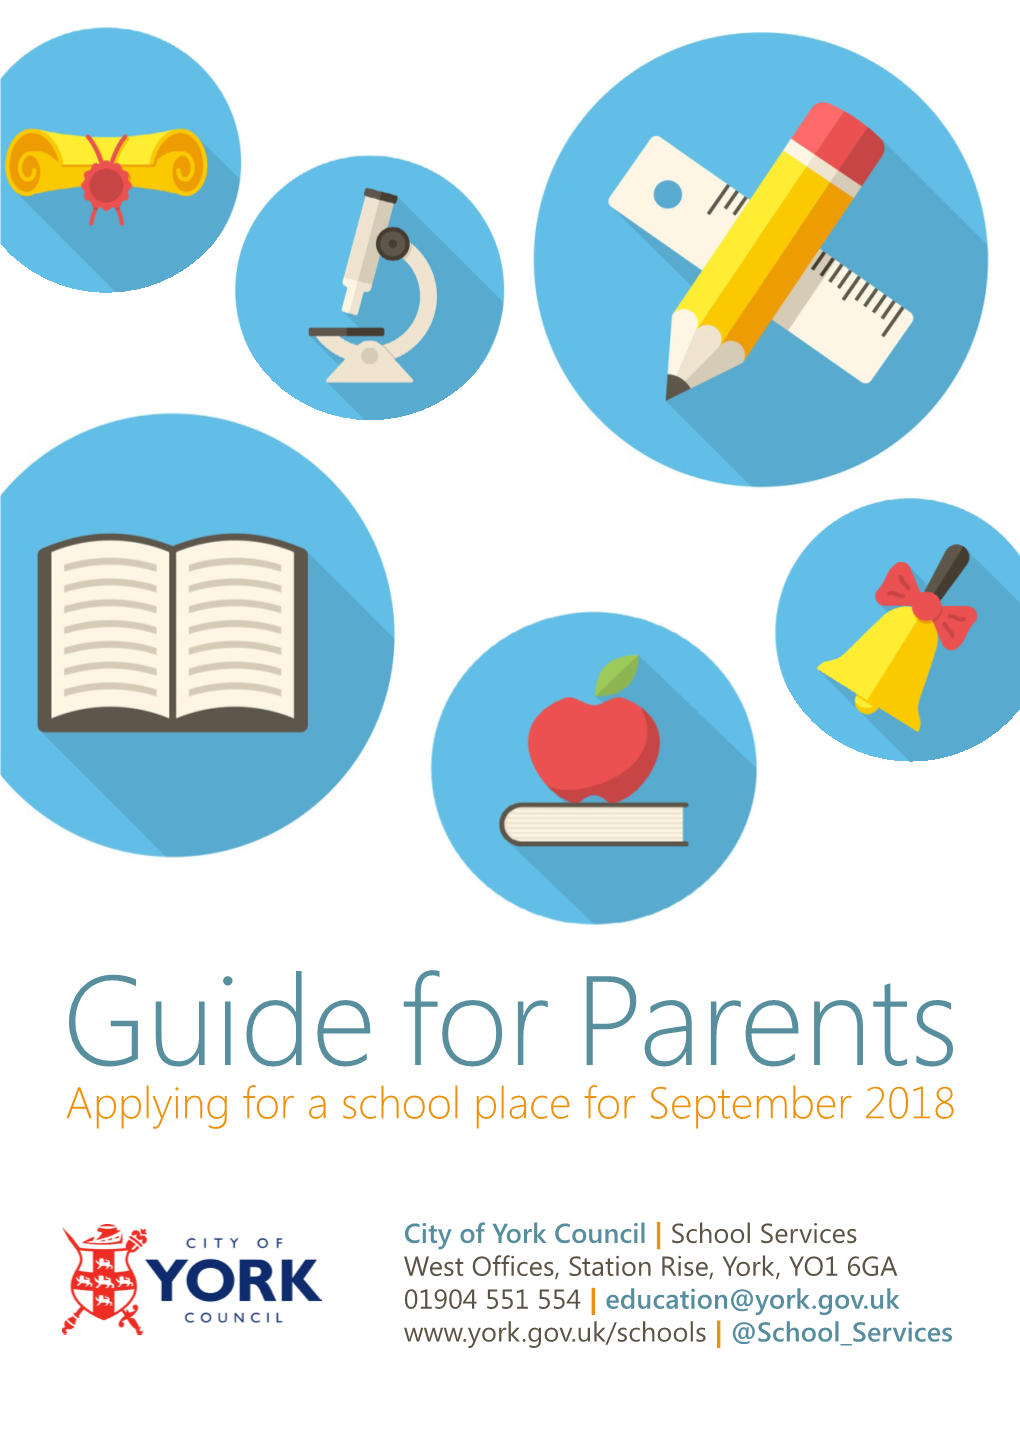 Applying for a School Place for September 2018